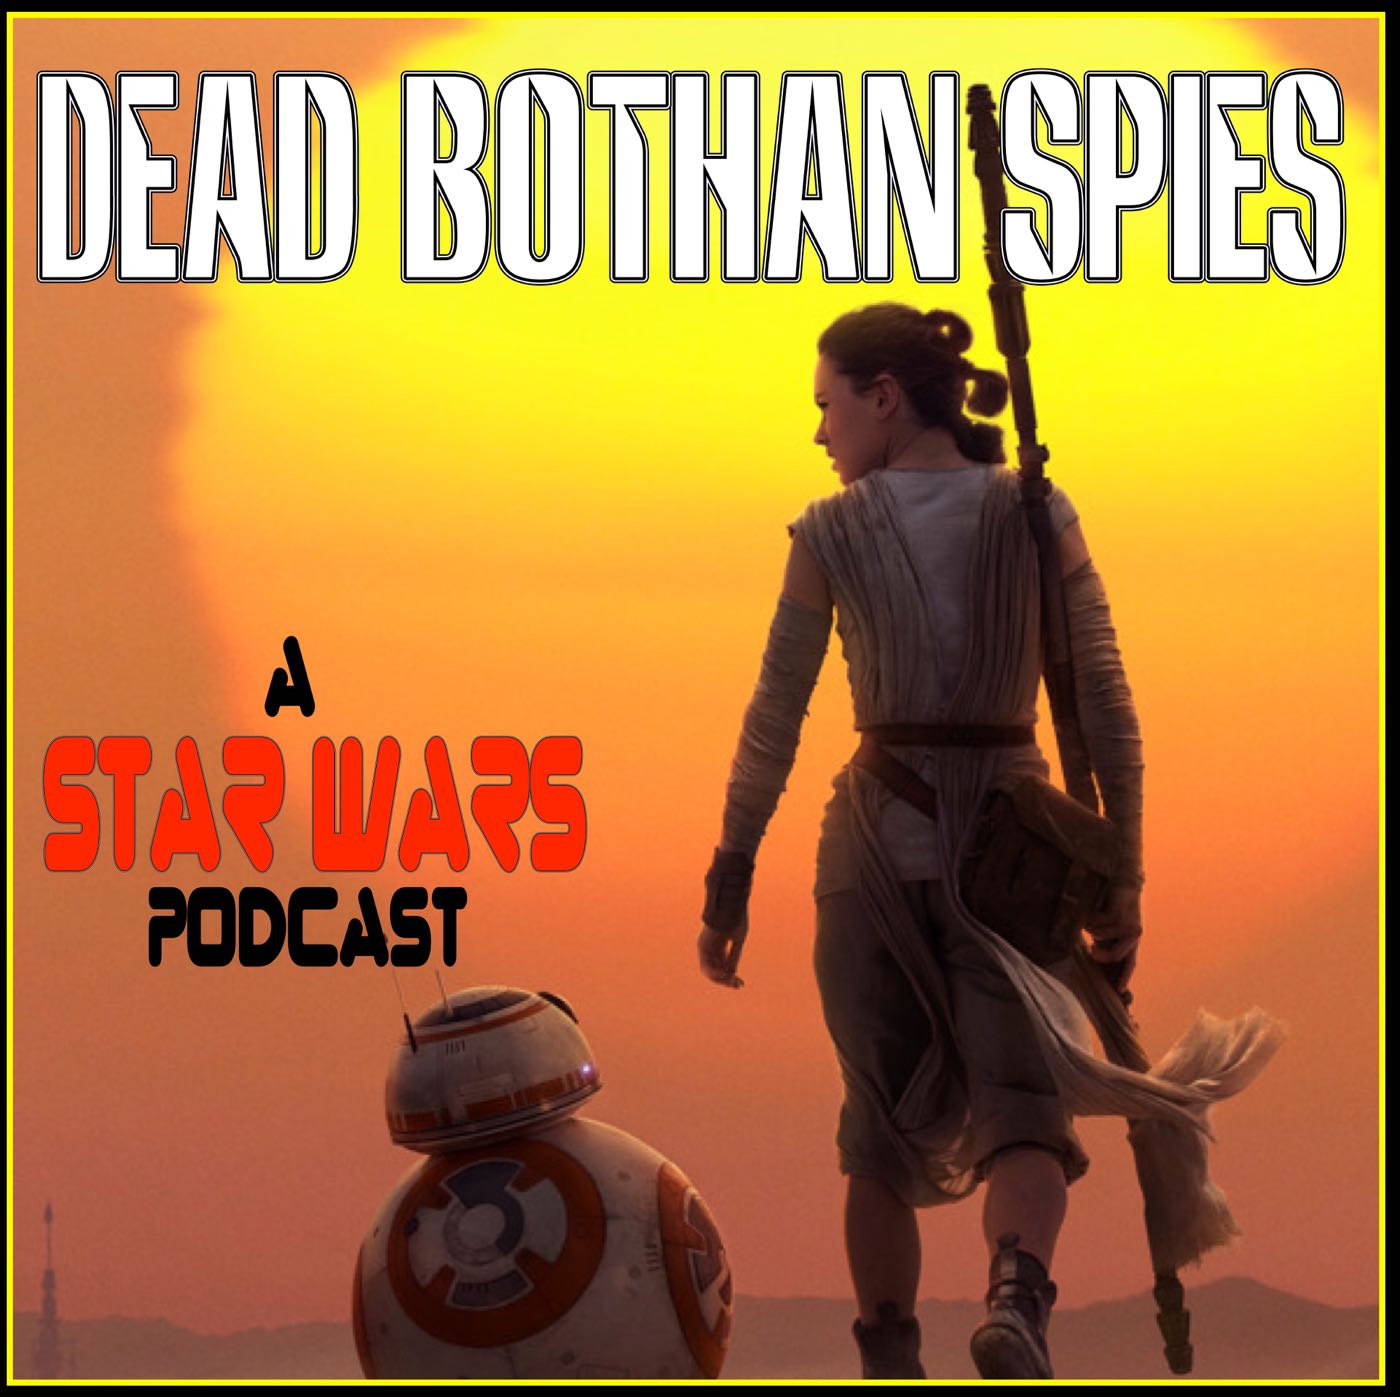 Dead Bothan Spies: A Star Wars Podcast